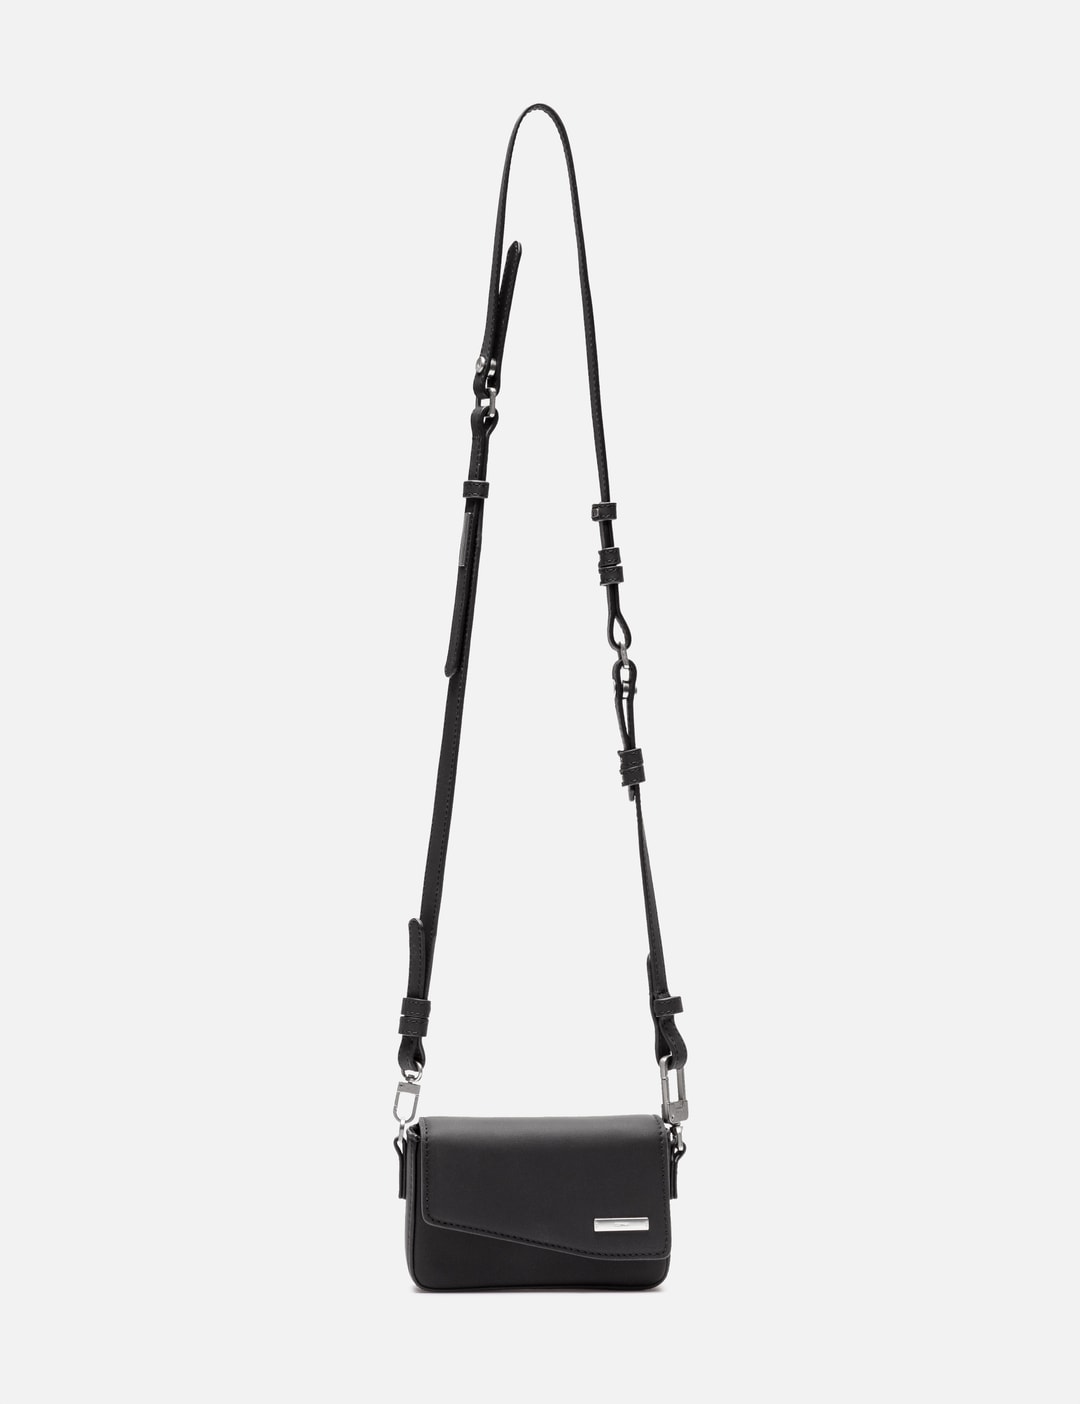 C2H4 - 007 - Basic Camera Bag | HBX - Globally Curated Fashion and ...